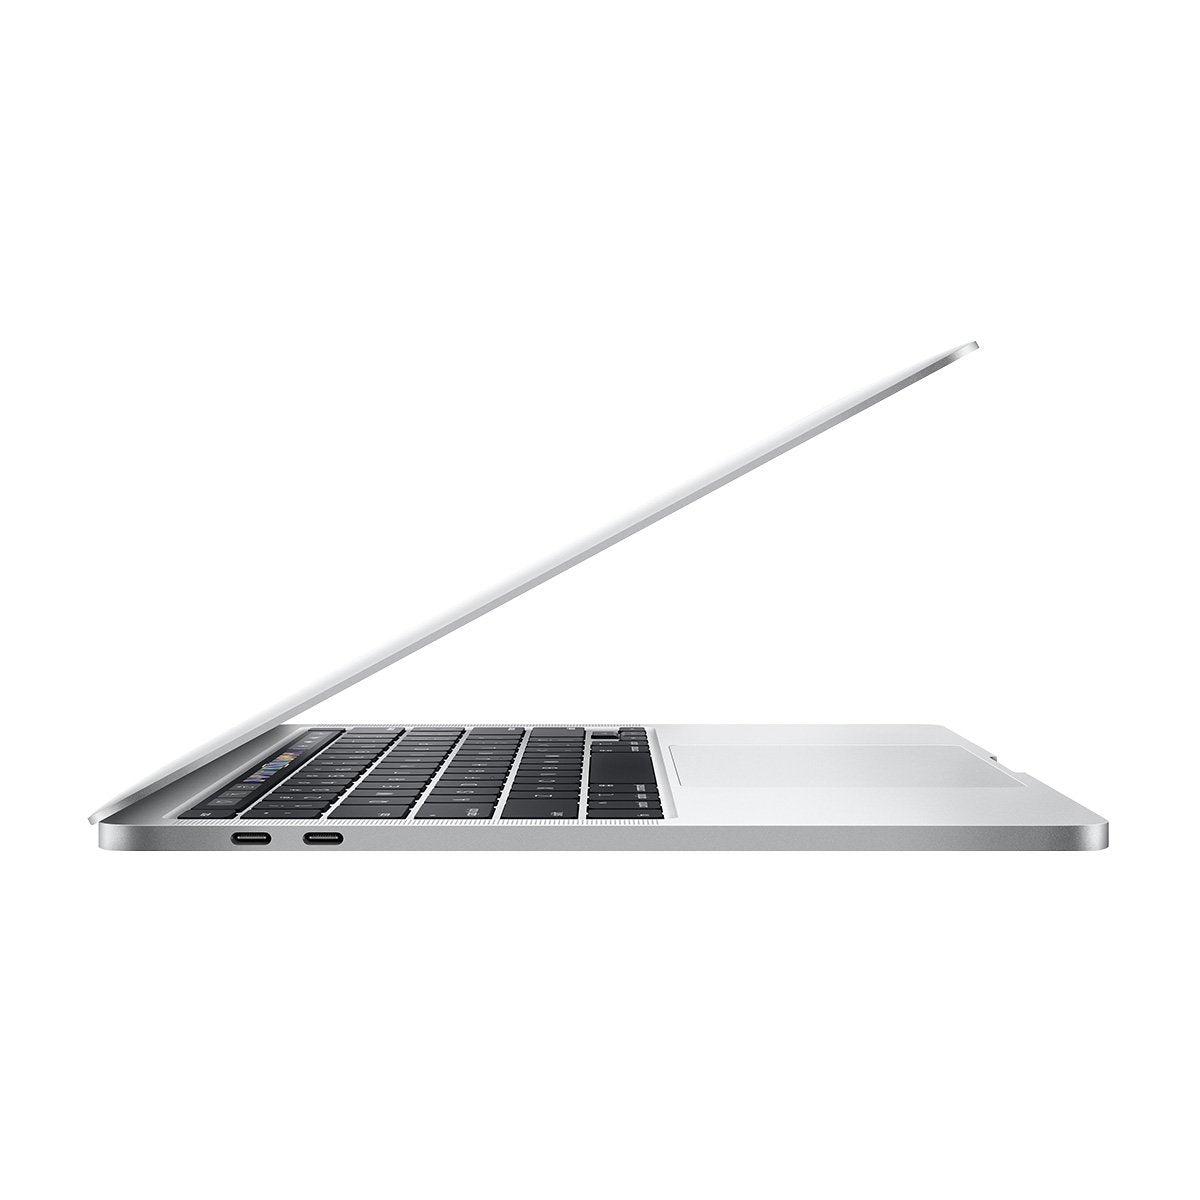 MacBook Pro (13-inch, 2017, Four Thunderbolt 3 ports) - Technical